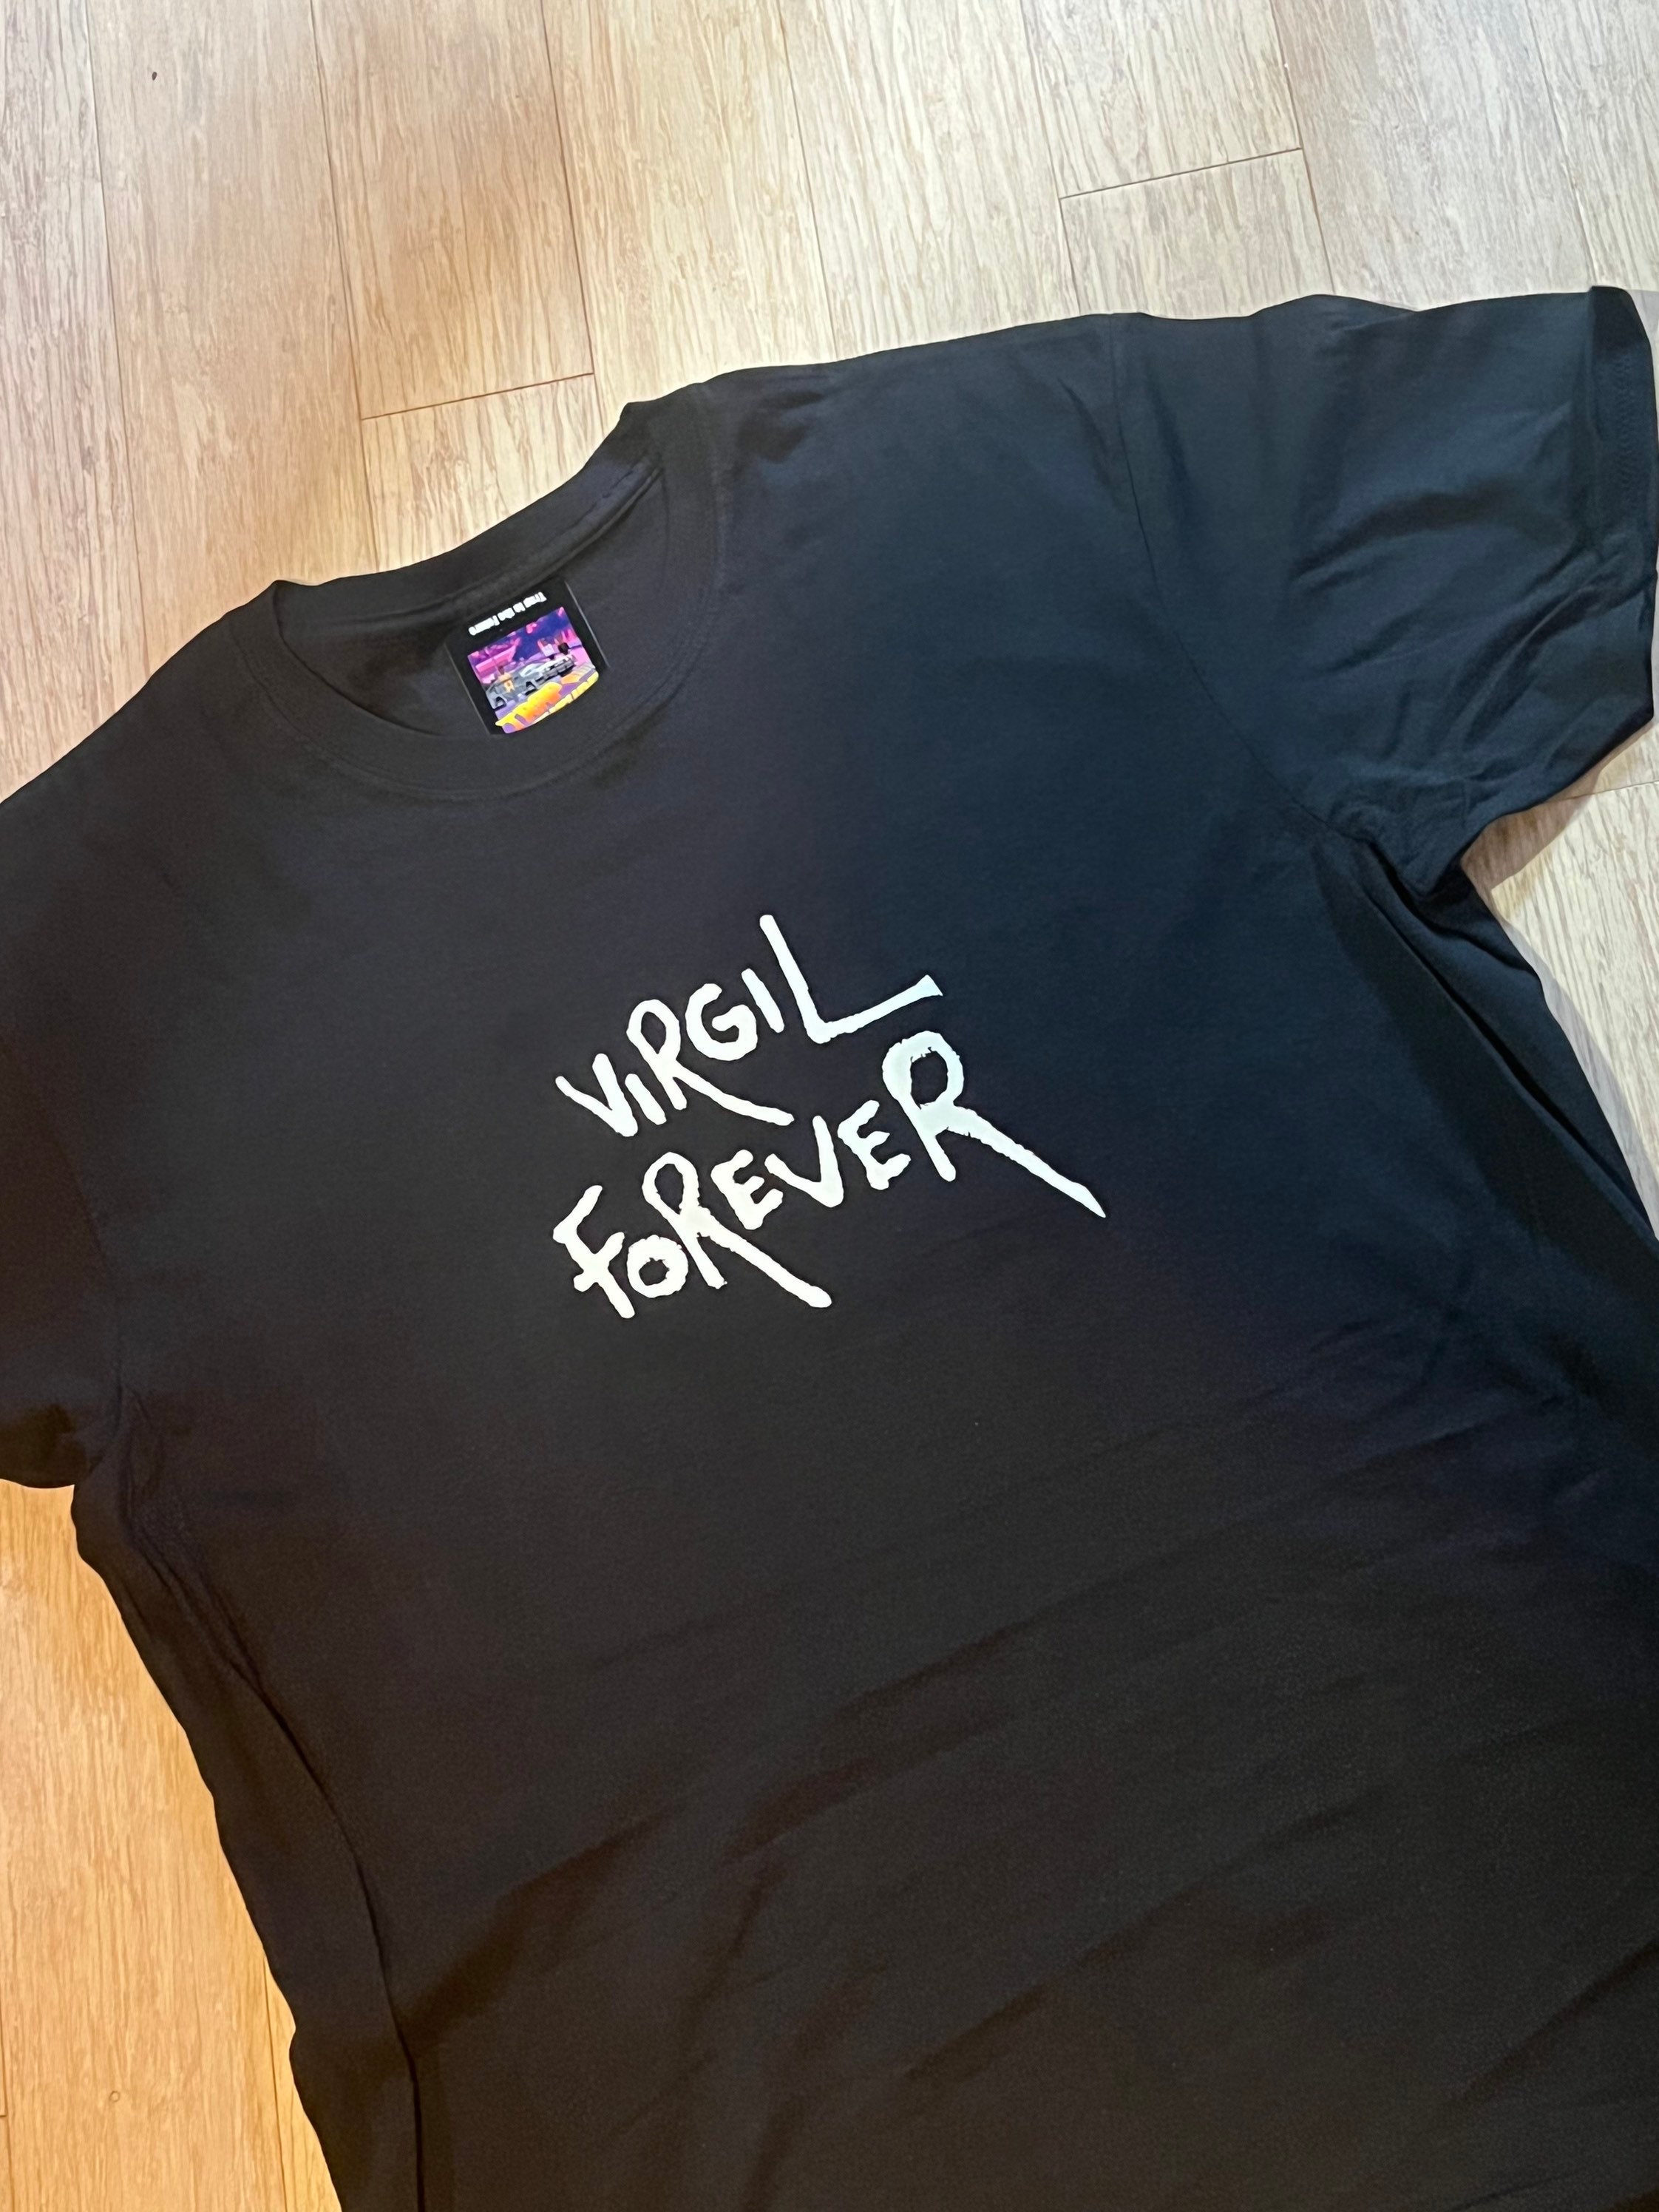 Virgil Was Here Rip Virgil Abloh T-Shirt, hoodie, sweater, longsleeve and  V-neck T-shirt